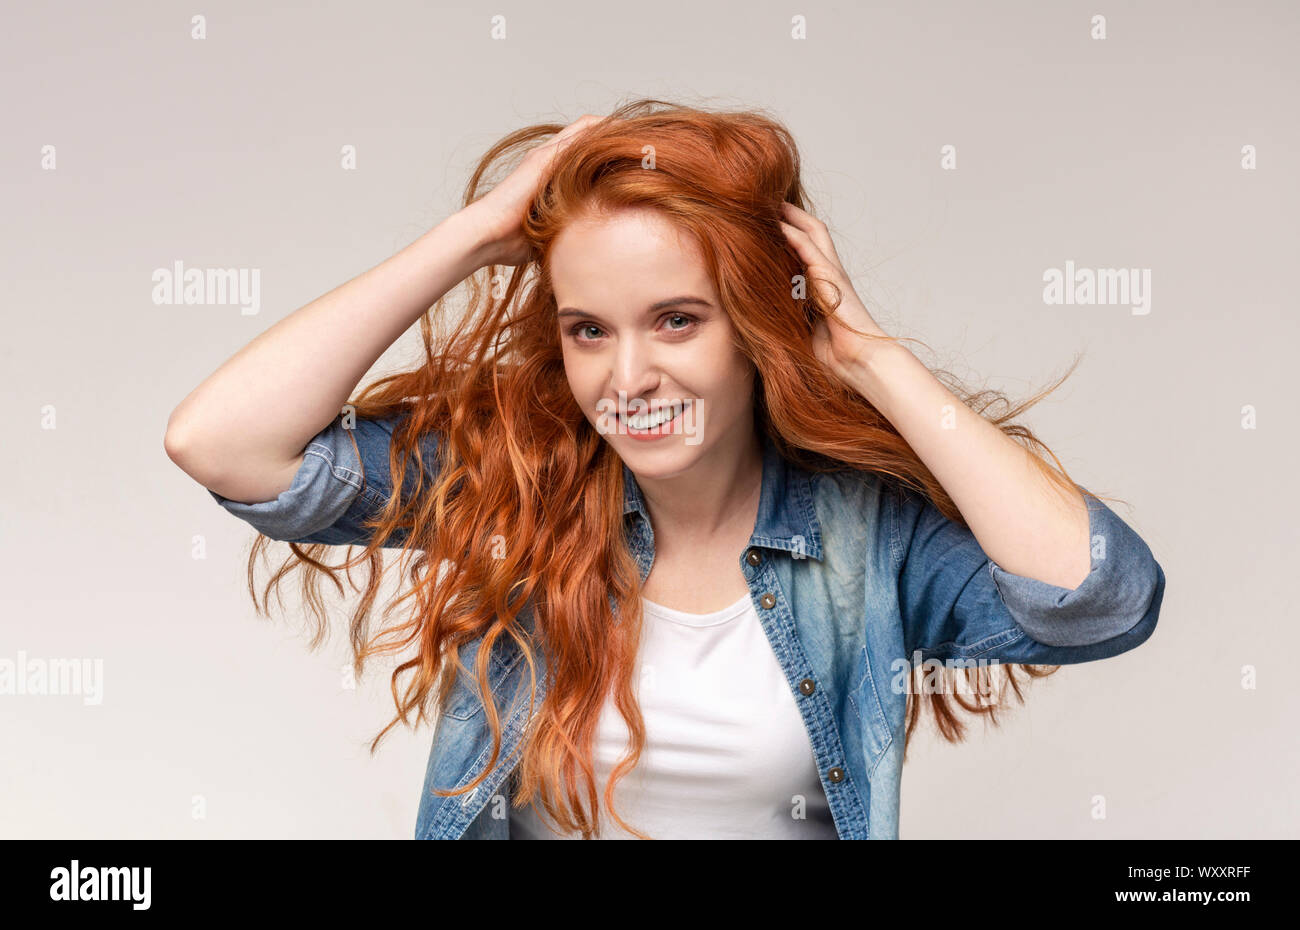 Redhead girl brushing hair with fingers, enjoying her natural look Stock Photo